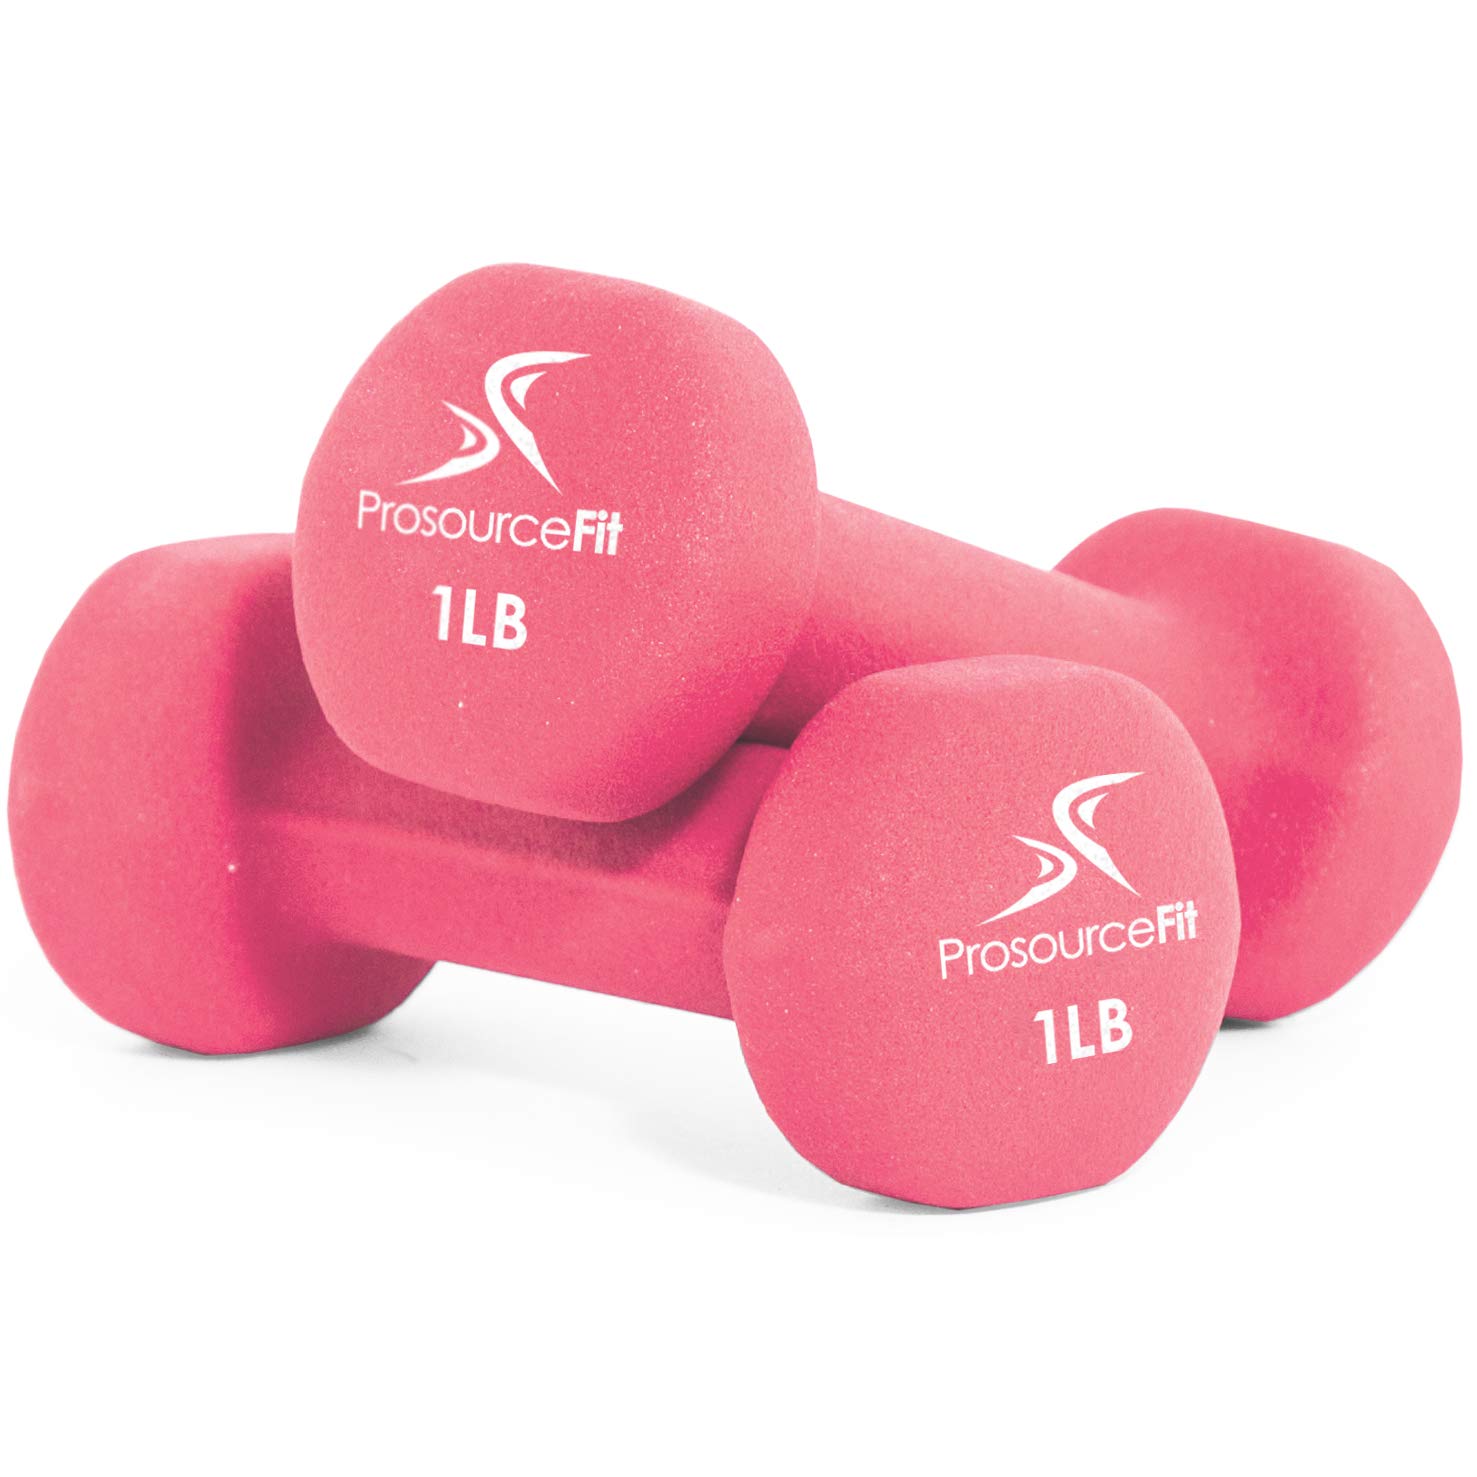 1-Lb Set of 2 ProsourceFit Neoprene Non-Slip Grip Dumbbell (Pink) $8.62 + Free Shipping w/ Prime or on $25+